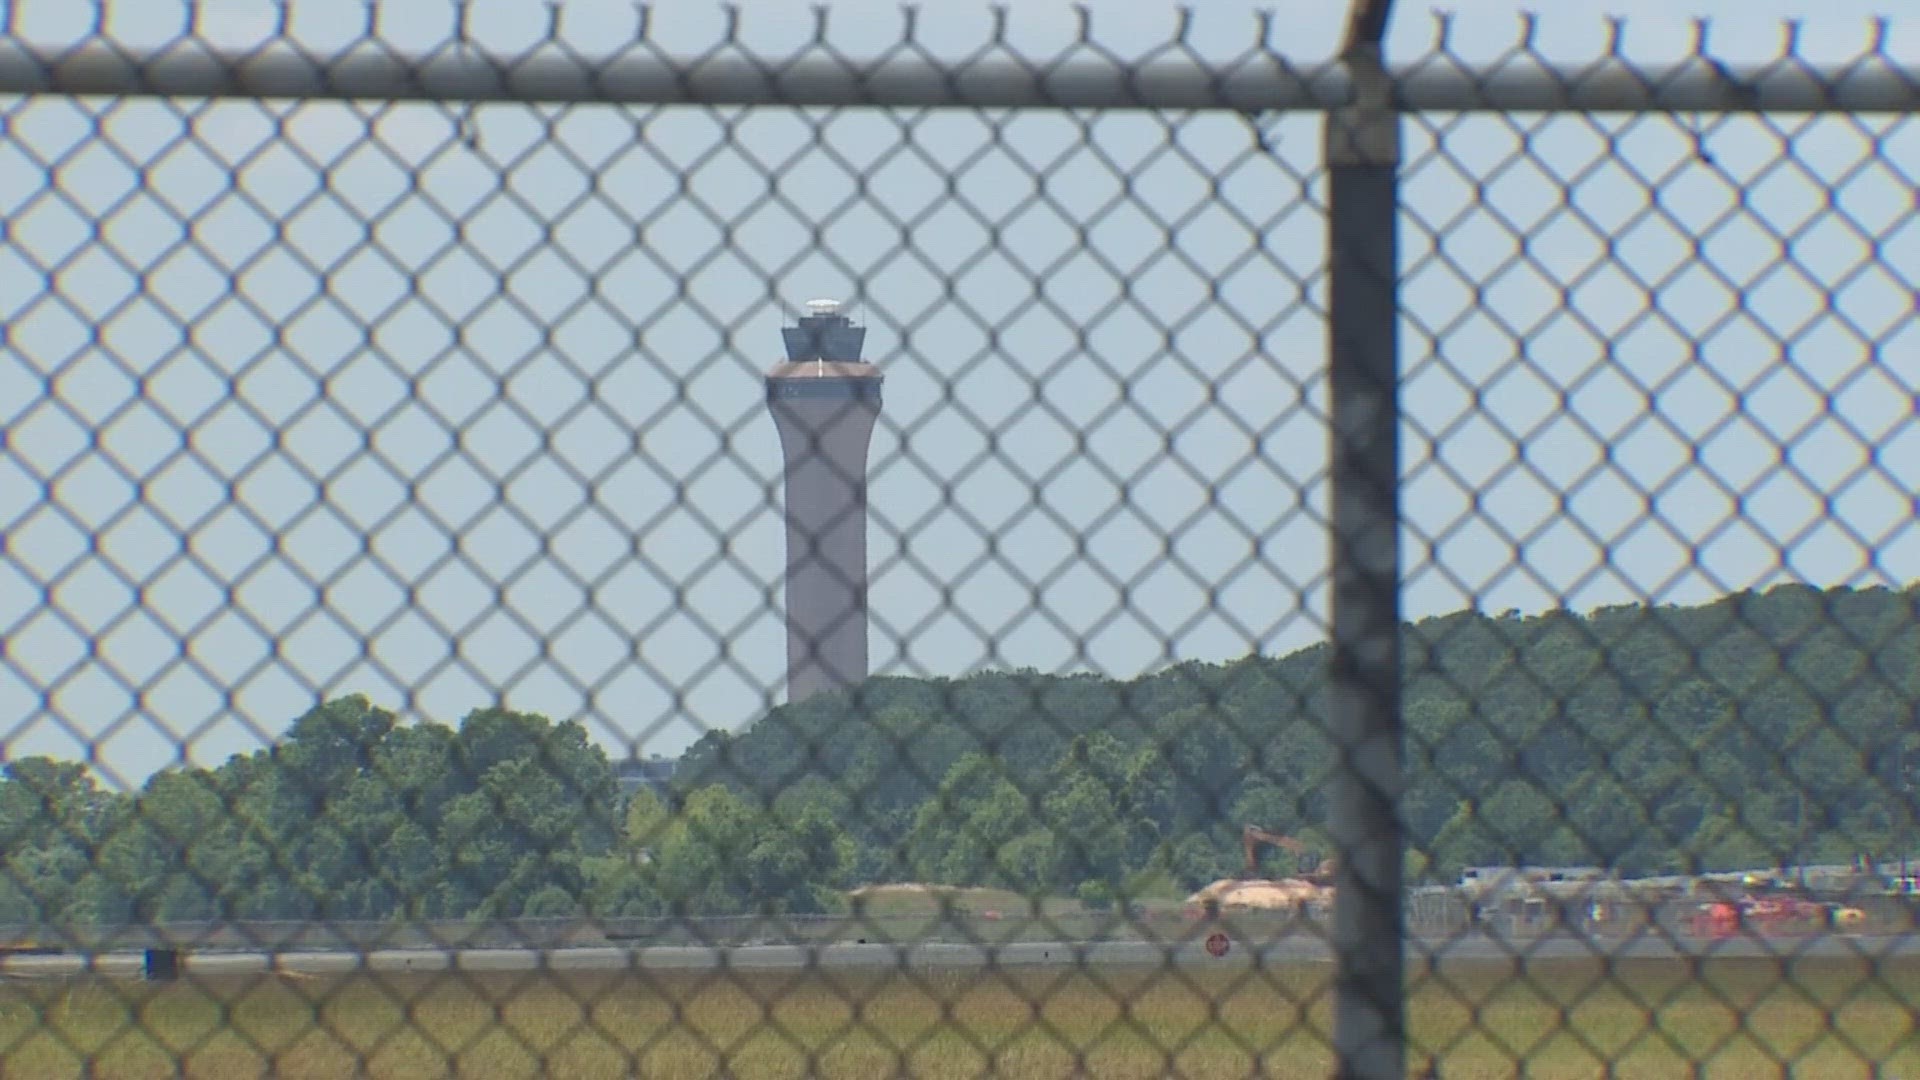 Airport officials are increasing perimeter patrols after two security breaches at IAH in less than two weeks.